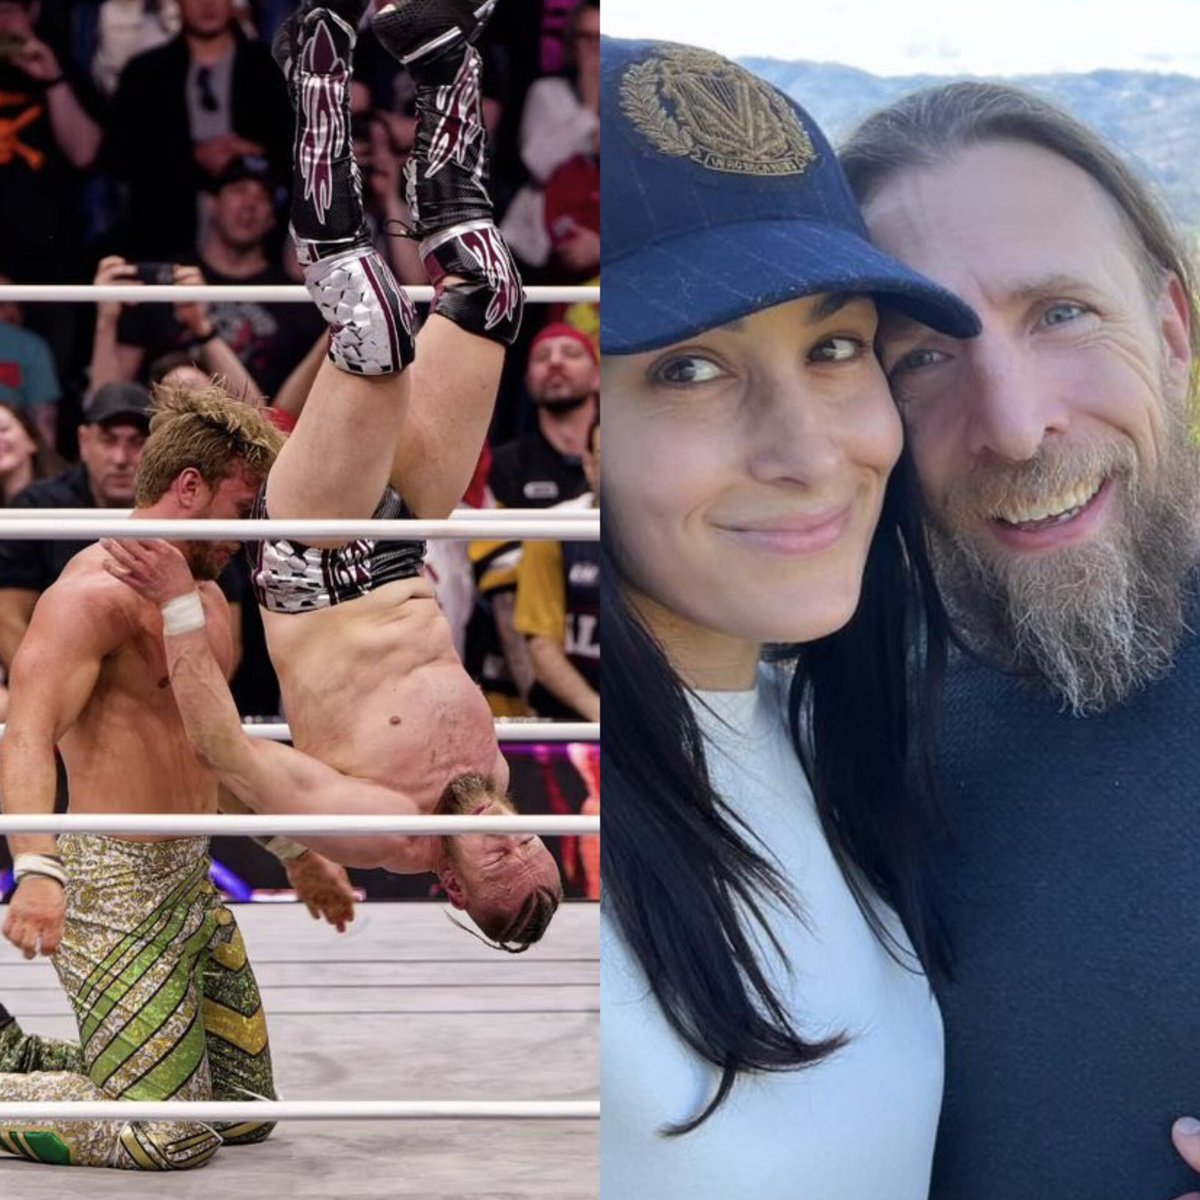 Brie Garcia on her podcast gave update on Bryan Danielson following his match with Will Ospreay:

“[Bryan] walked away healthy from the match. I shouldn’t say healthy, he did hurt himself. I think everyone knows, he did fall on his neck.

He’s good. Not like anything where he is…